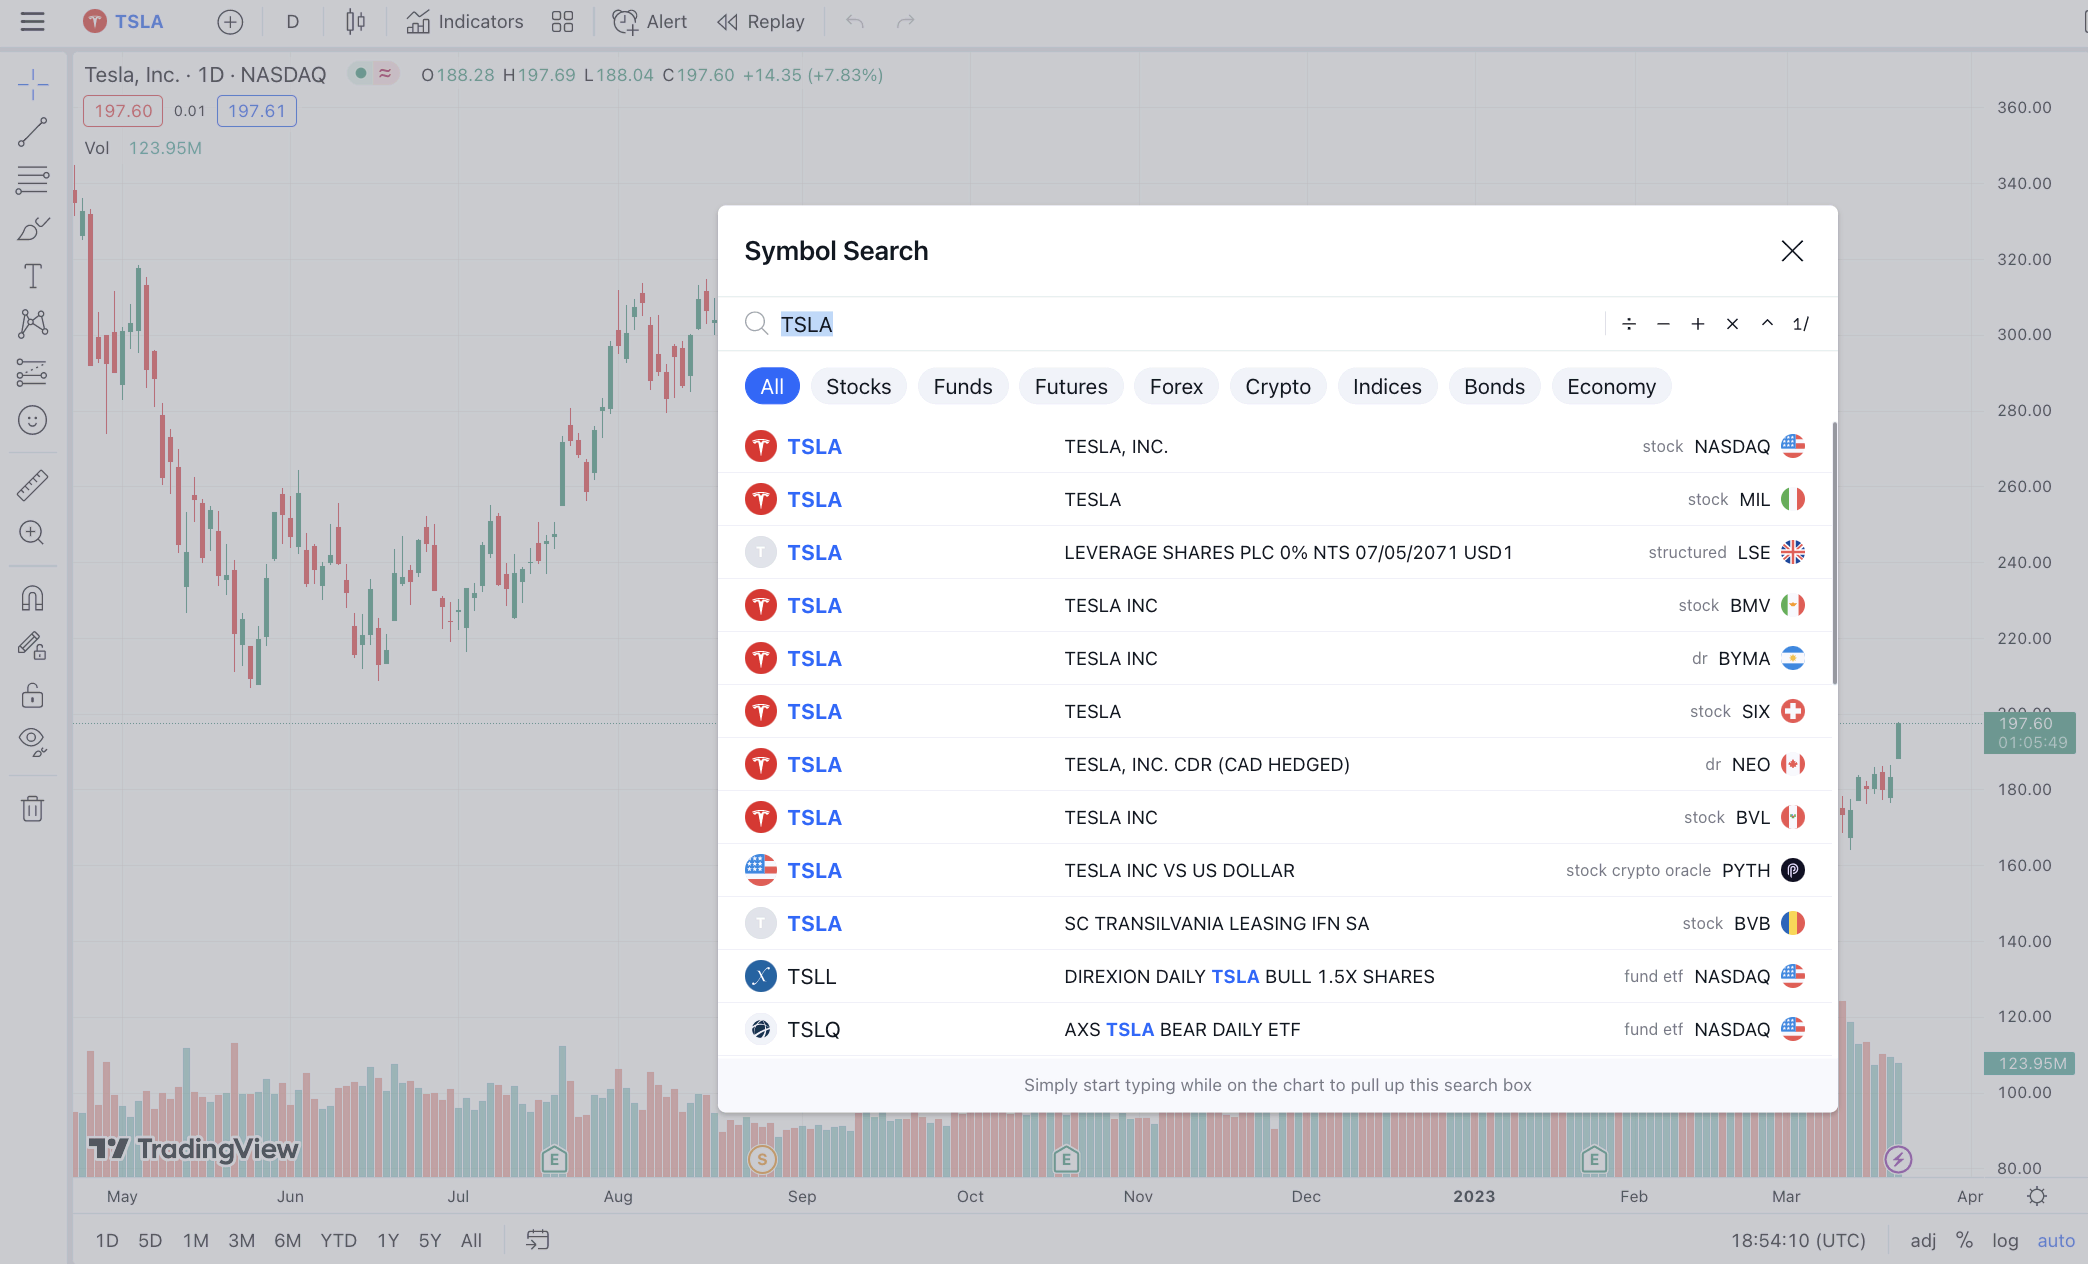 Available assets on TradingView